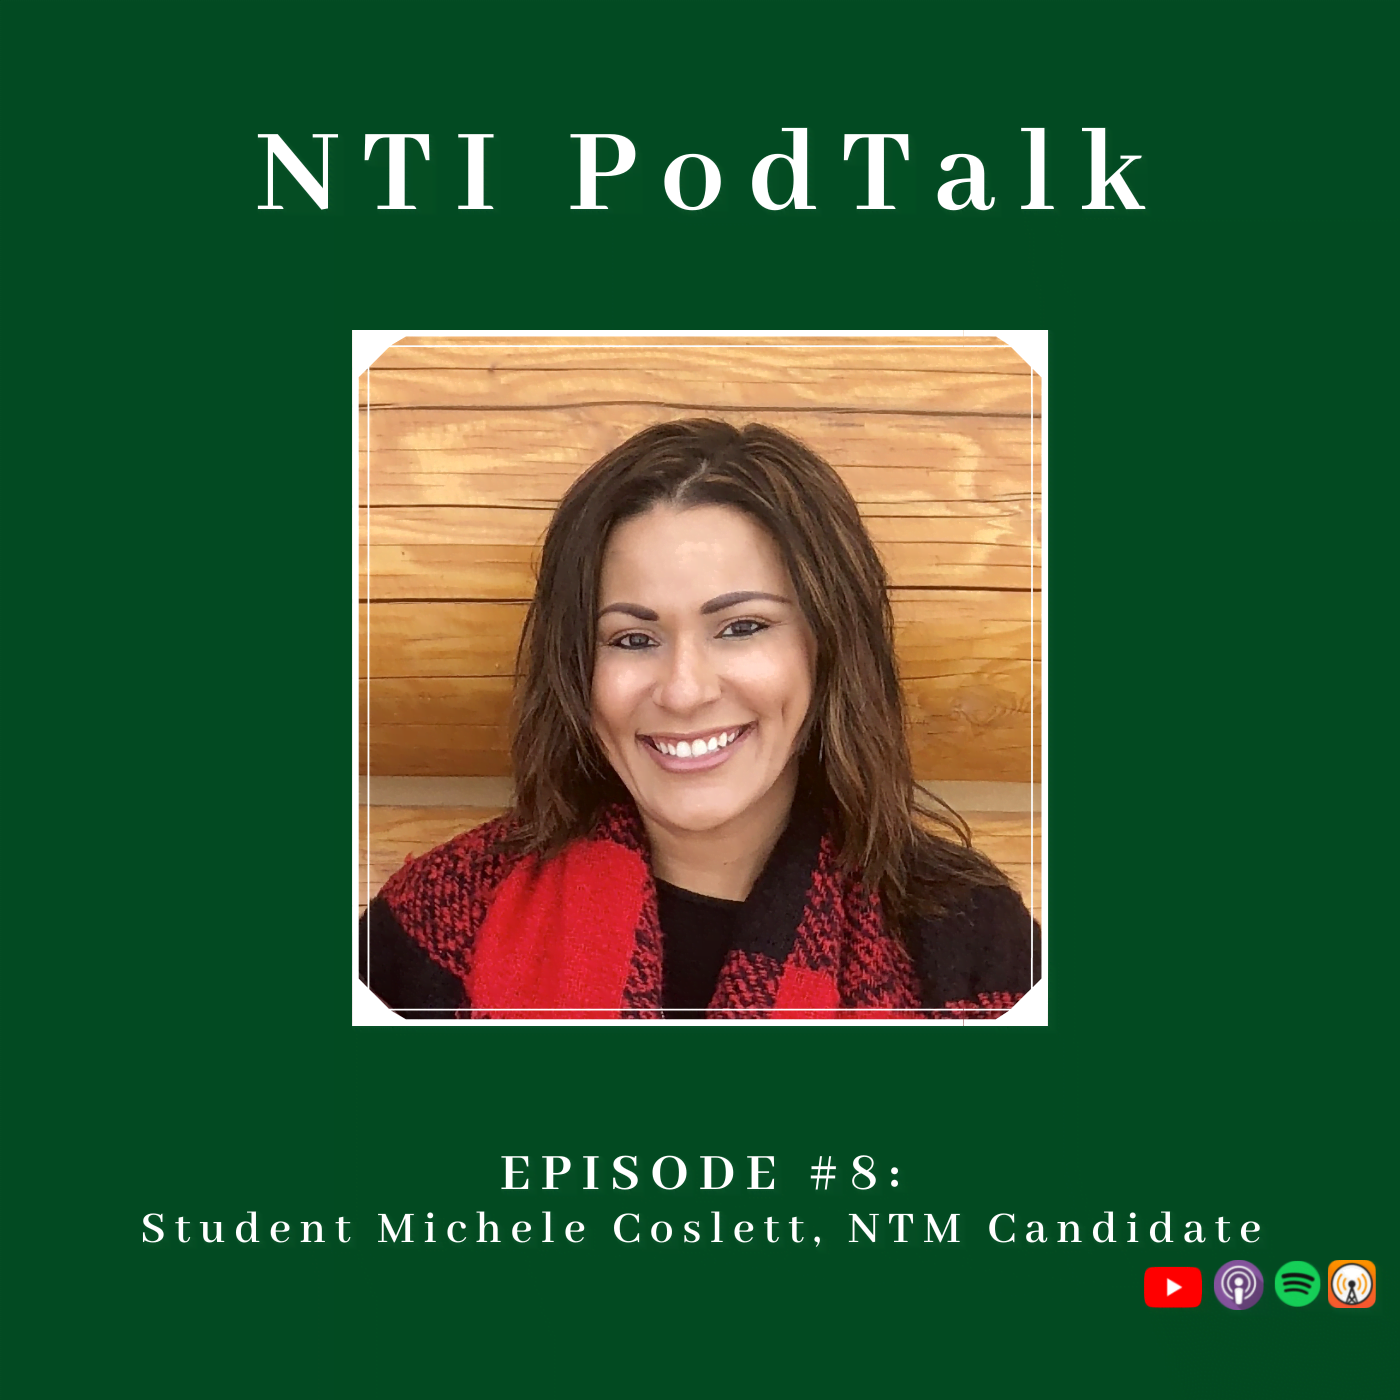 Featured image for “NTI PodTalk with Student Michele Coslett”